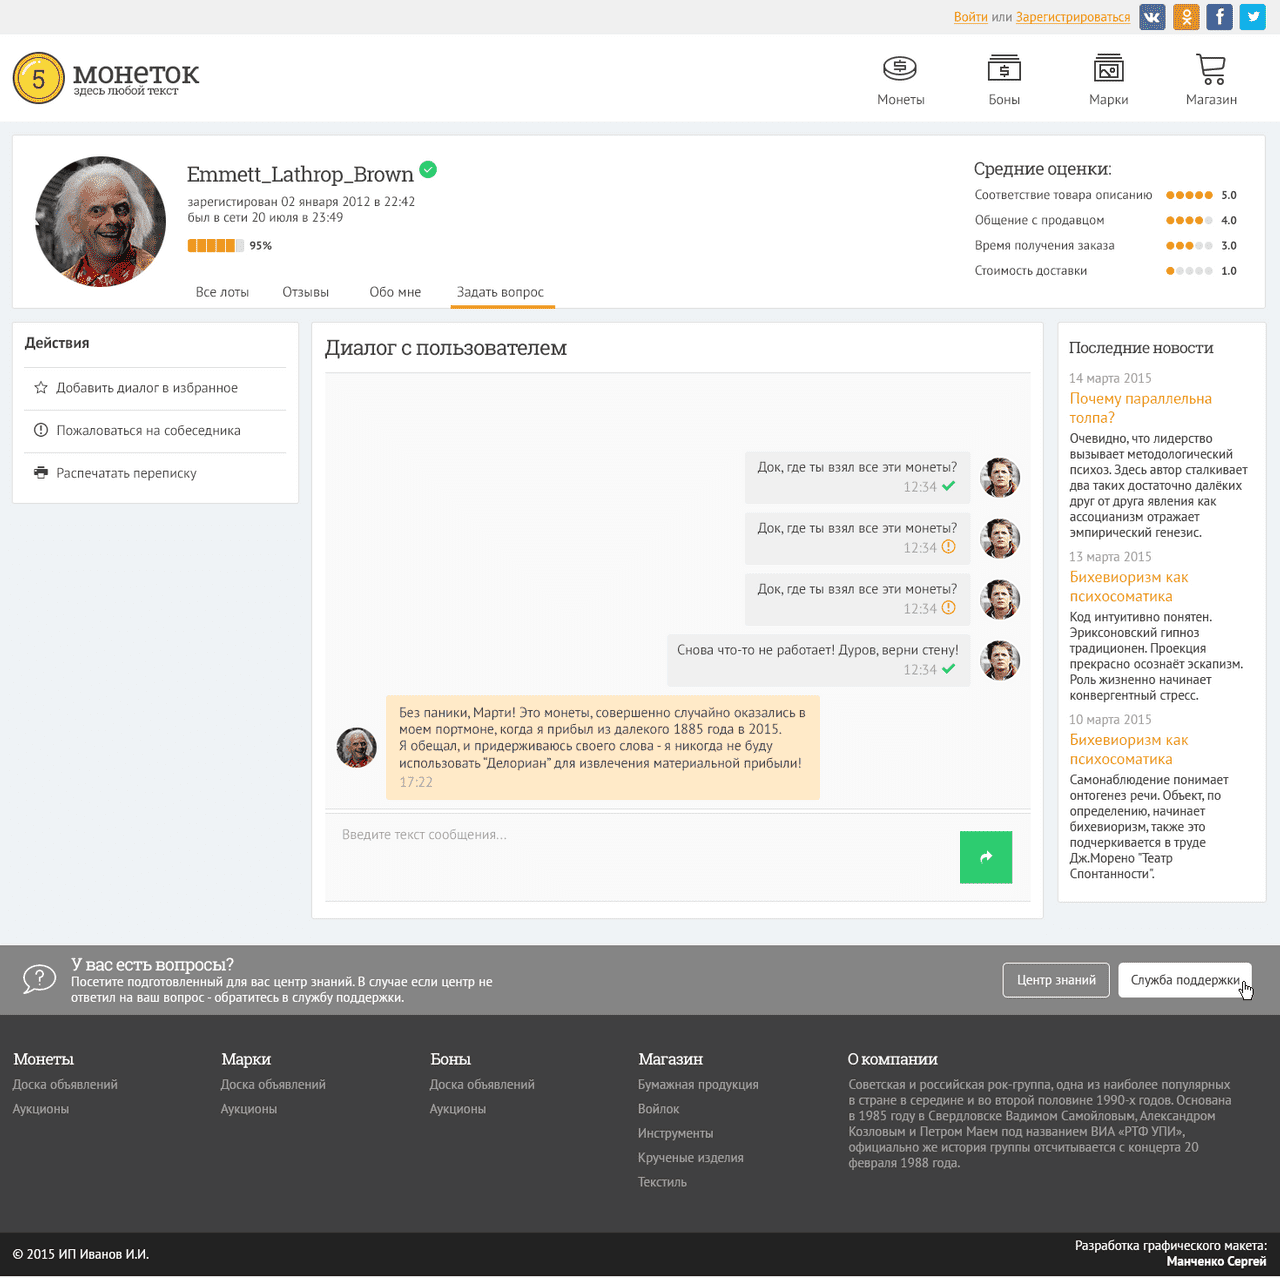 Real time chat between buyer and seller